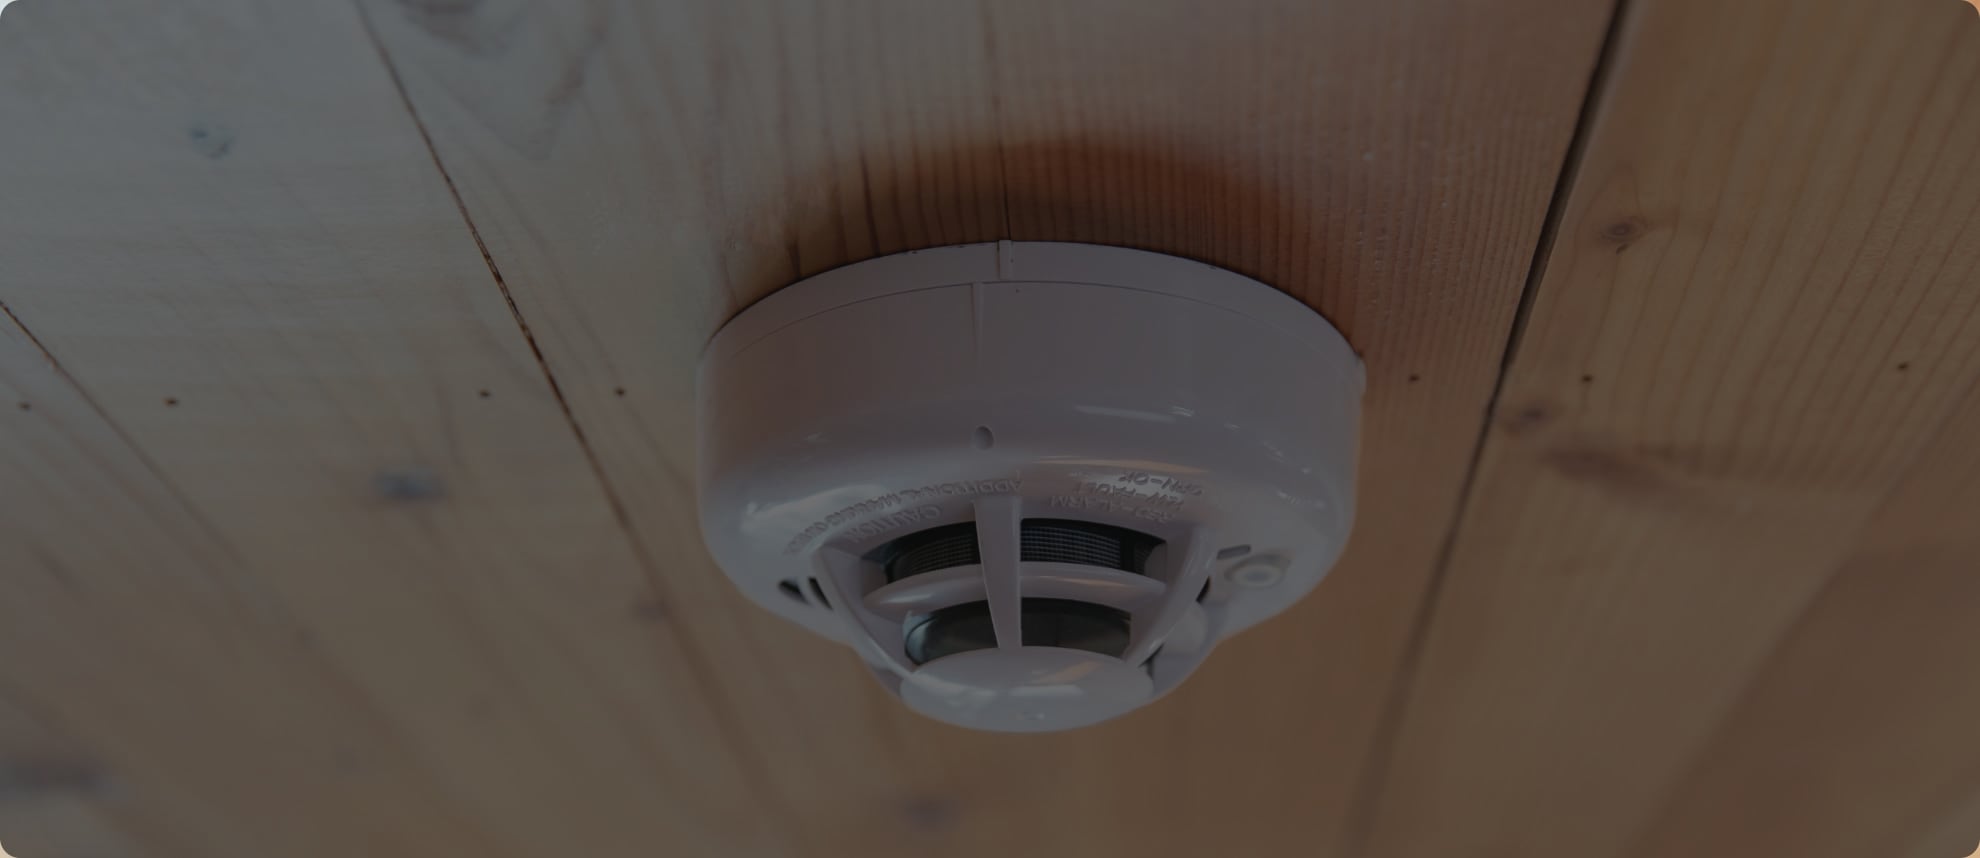 Vivint Monitored Smoke Alarm in Eau Claire